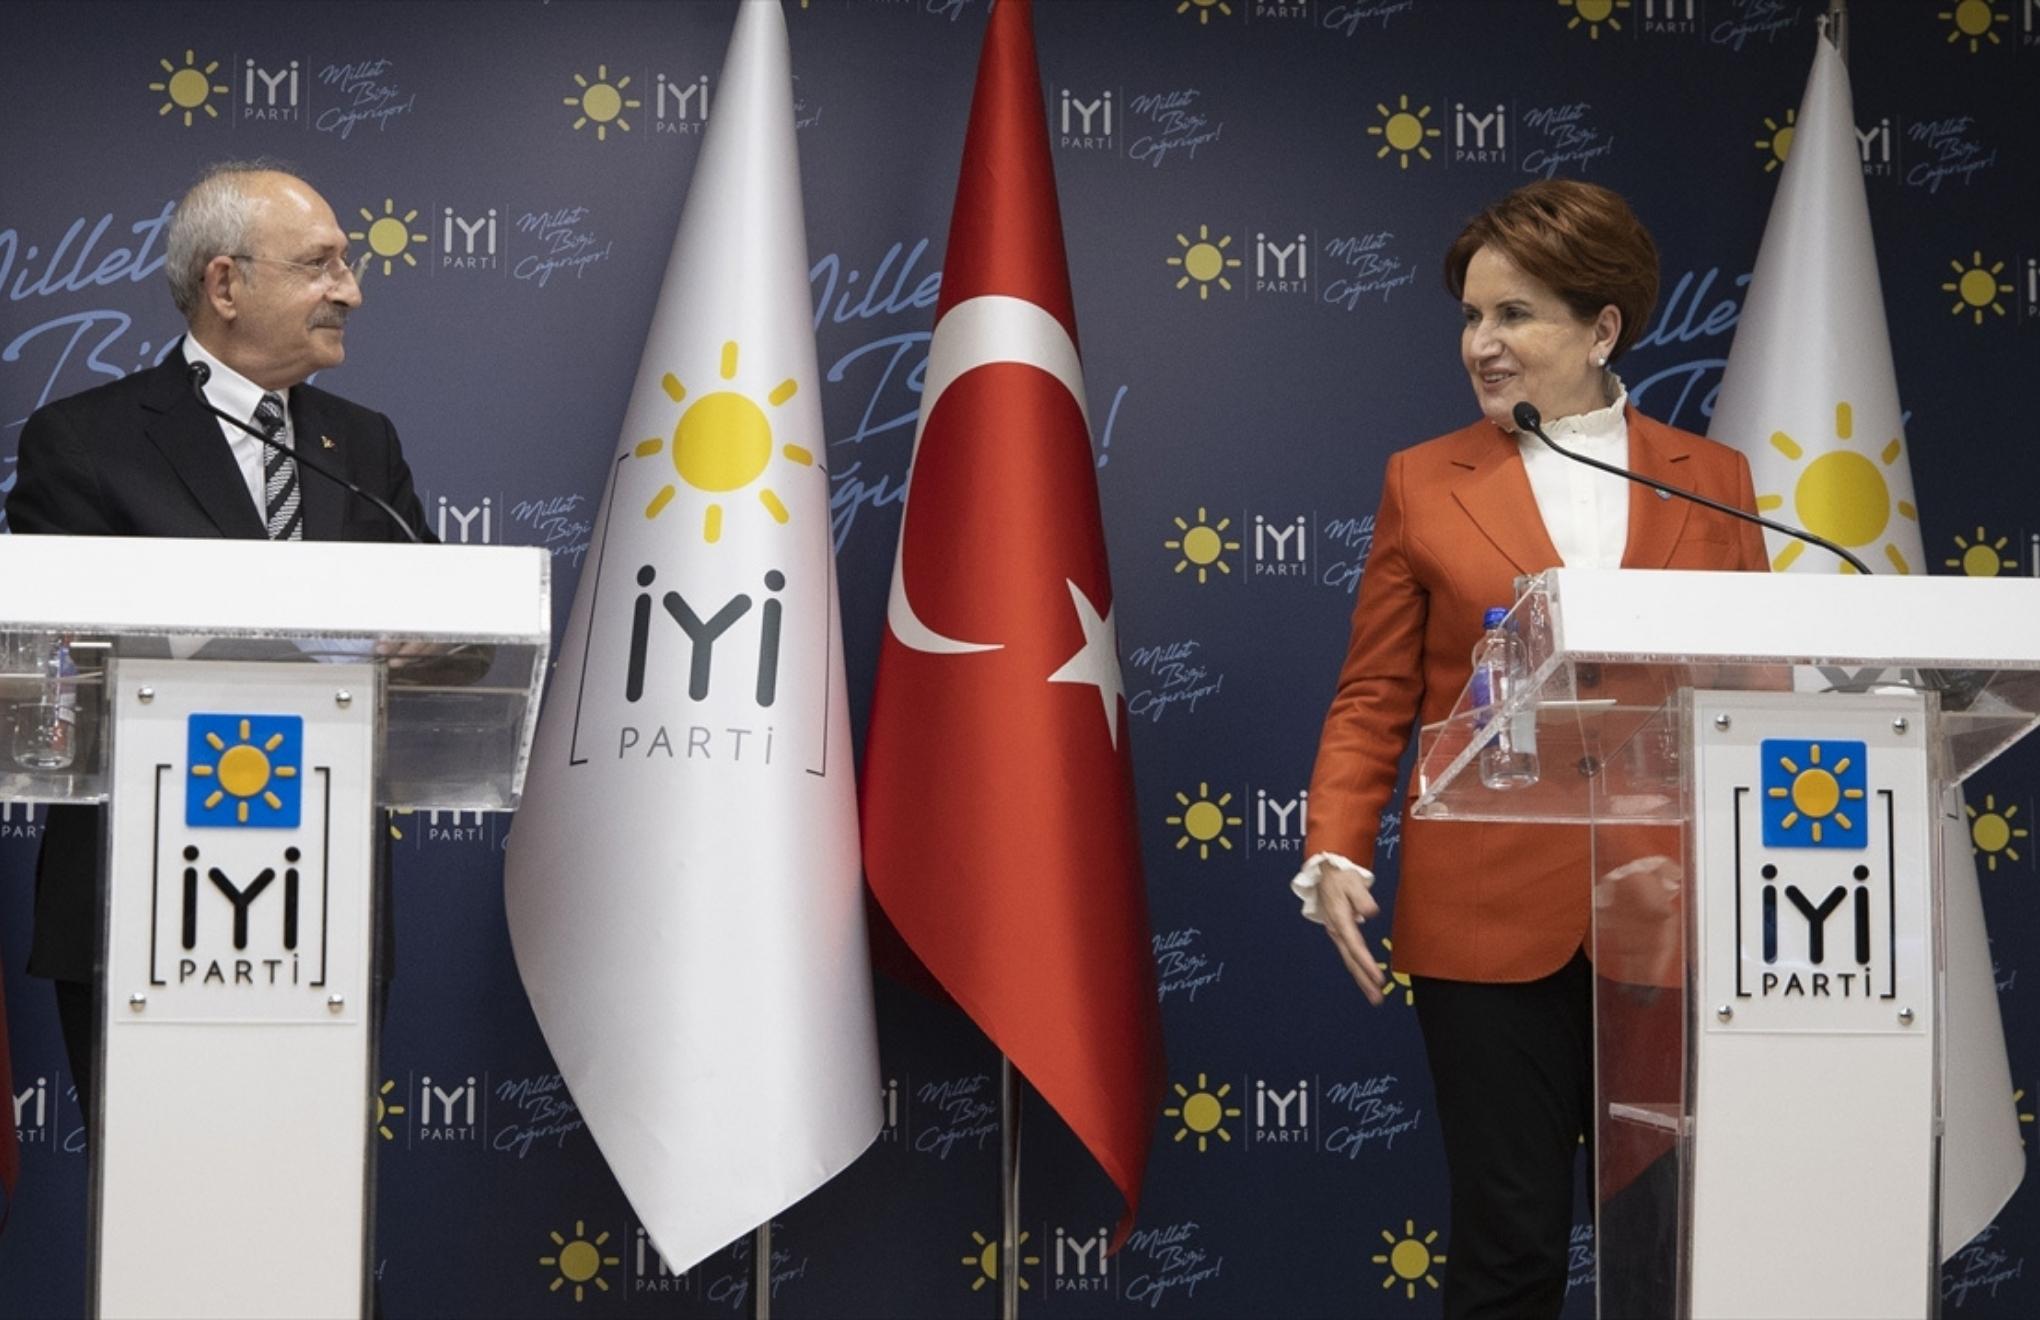 Opposition leaders call for an urgent snap election in Turkey